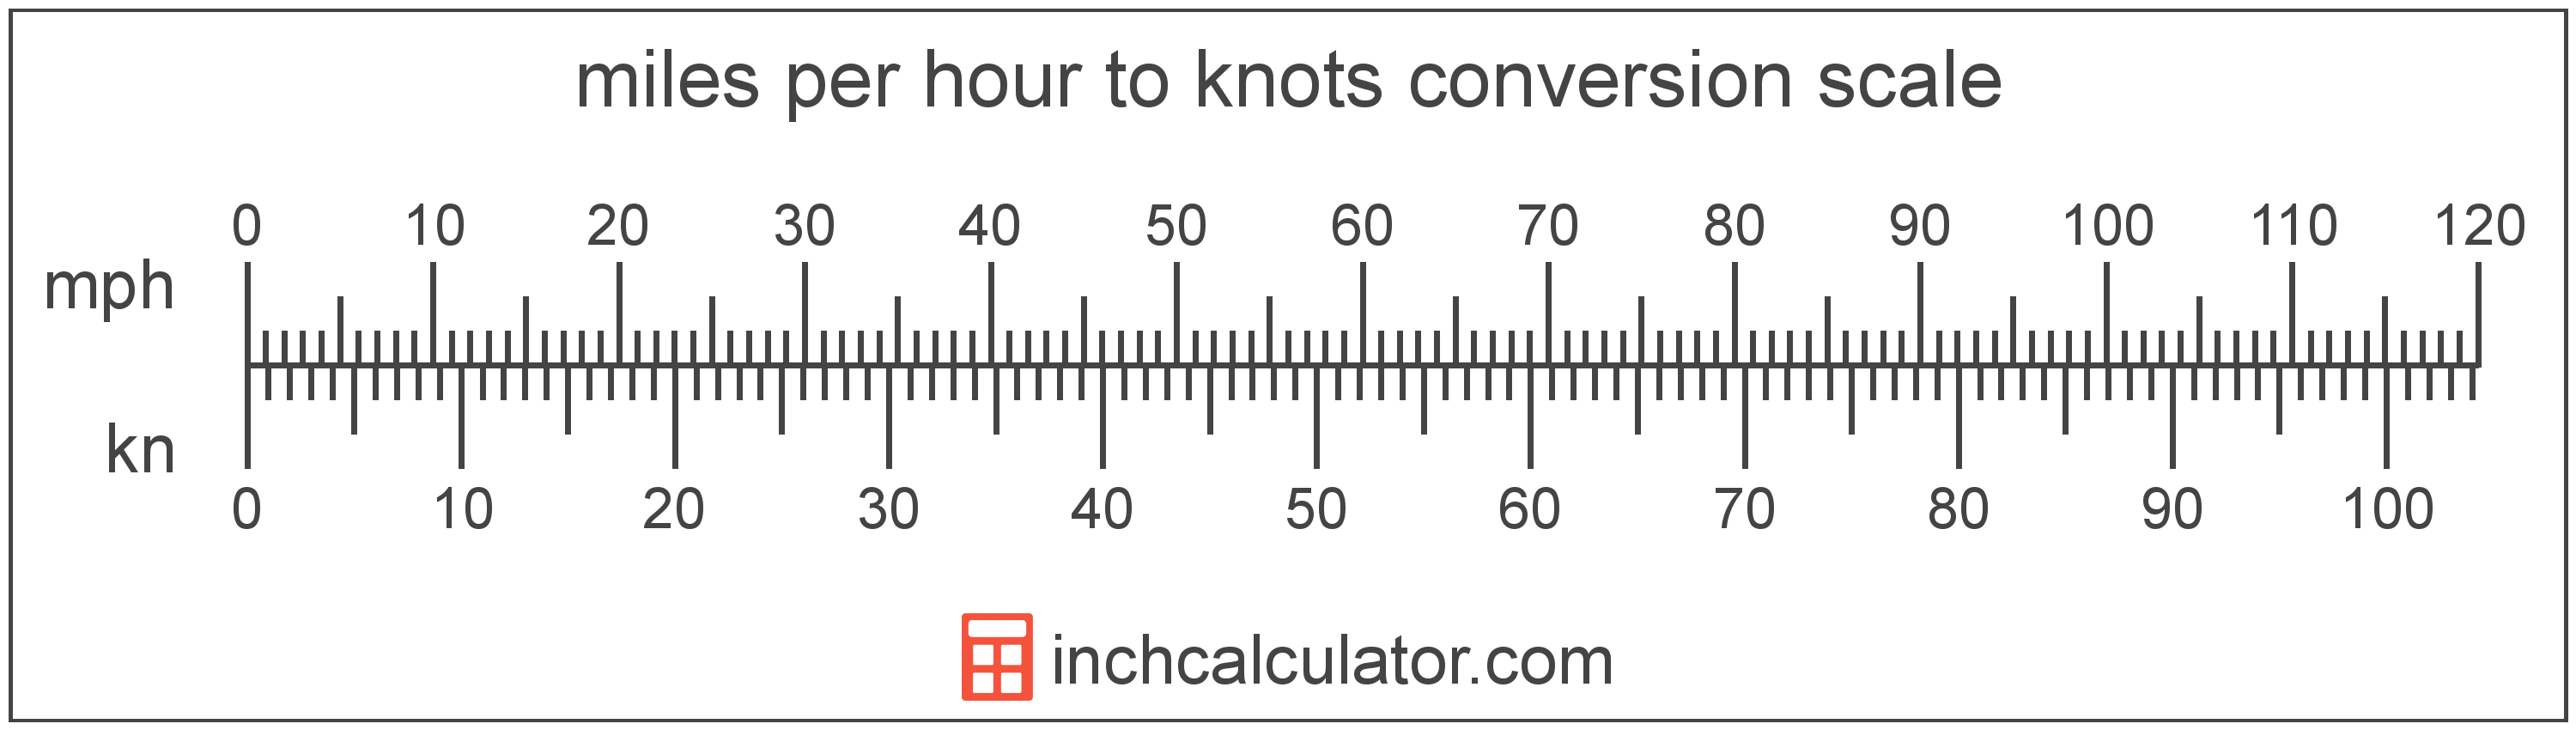 conversion scale showing knots and equivalent miles per hour speed values